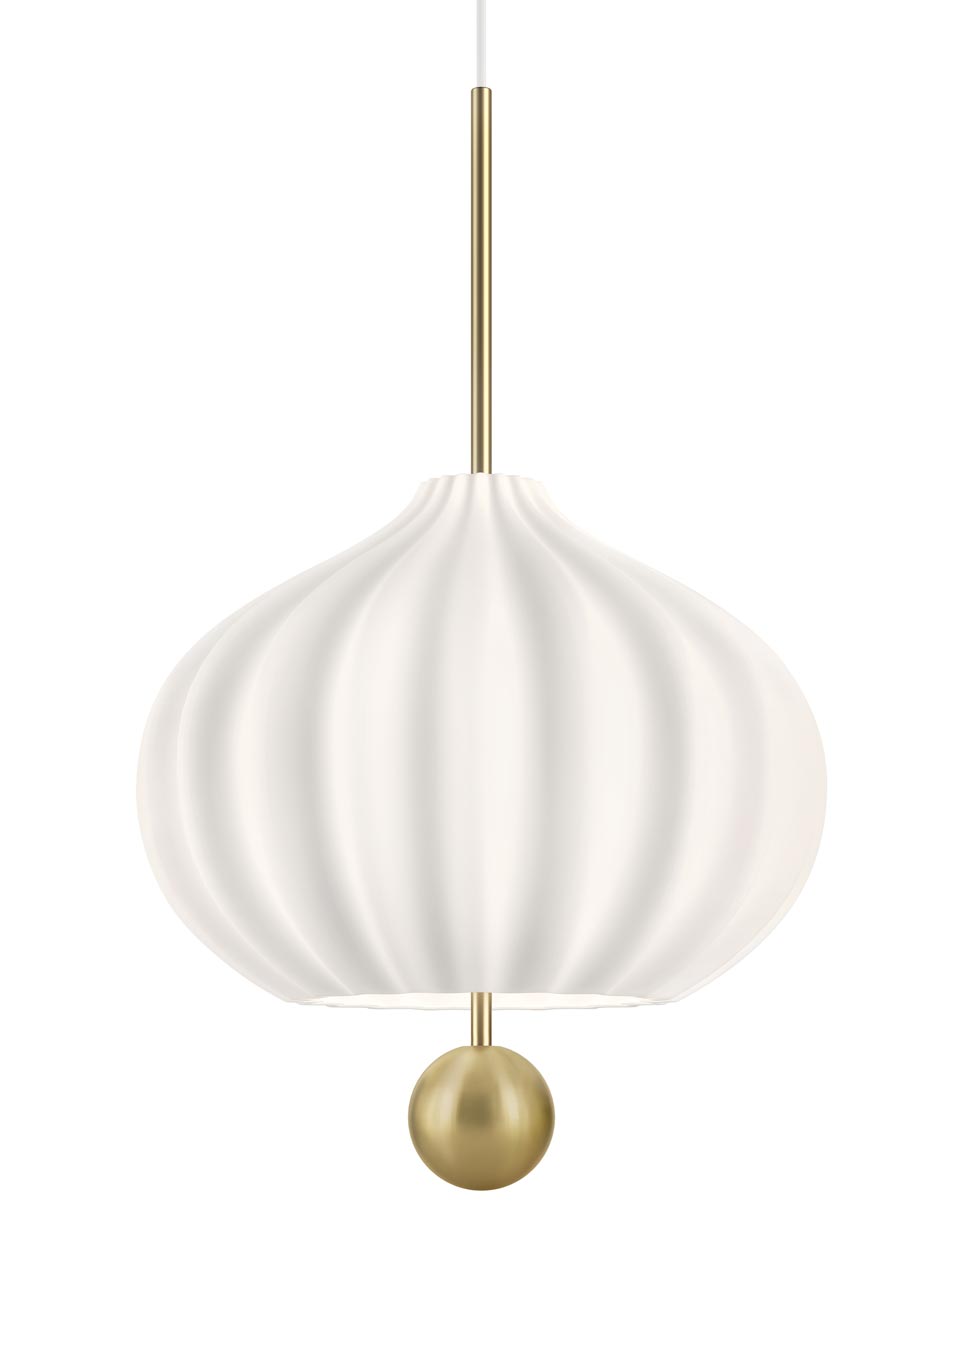 Lilli pendant lamp white opal and gold like a lily. kdln. 